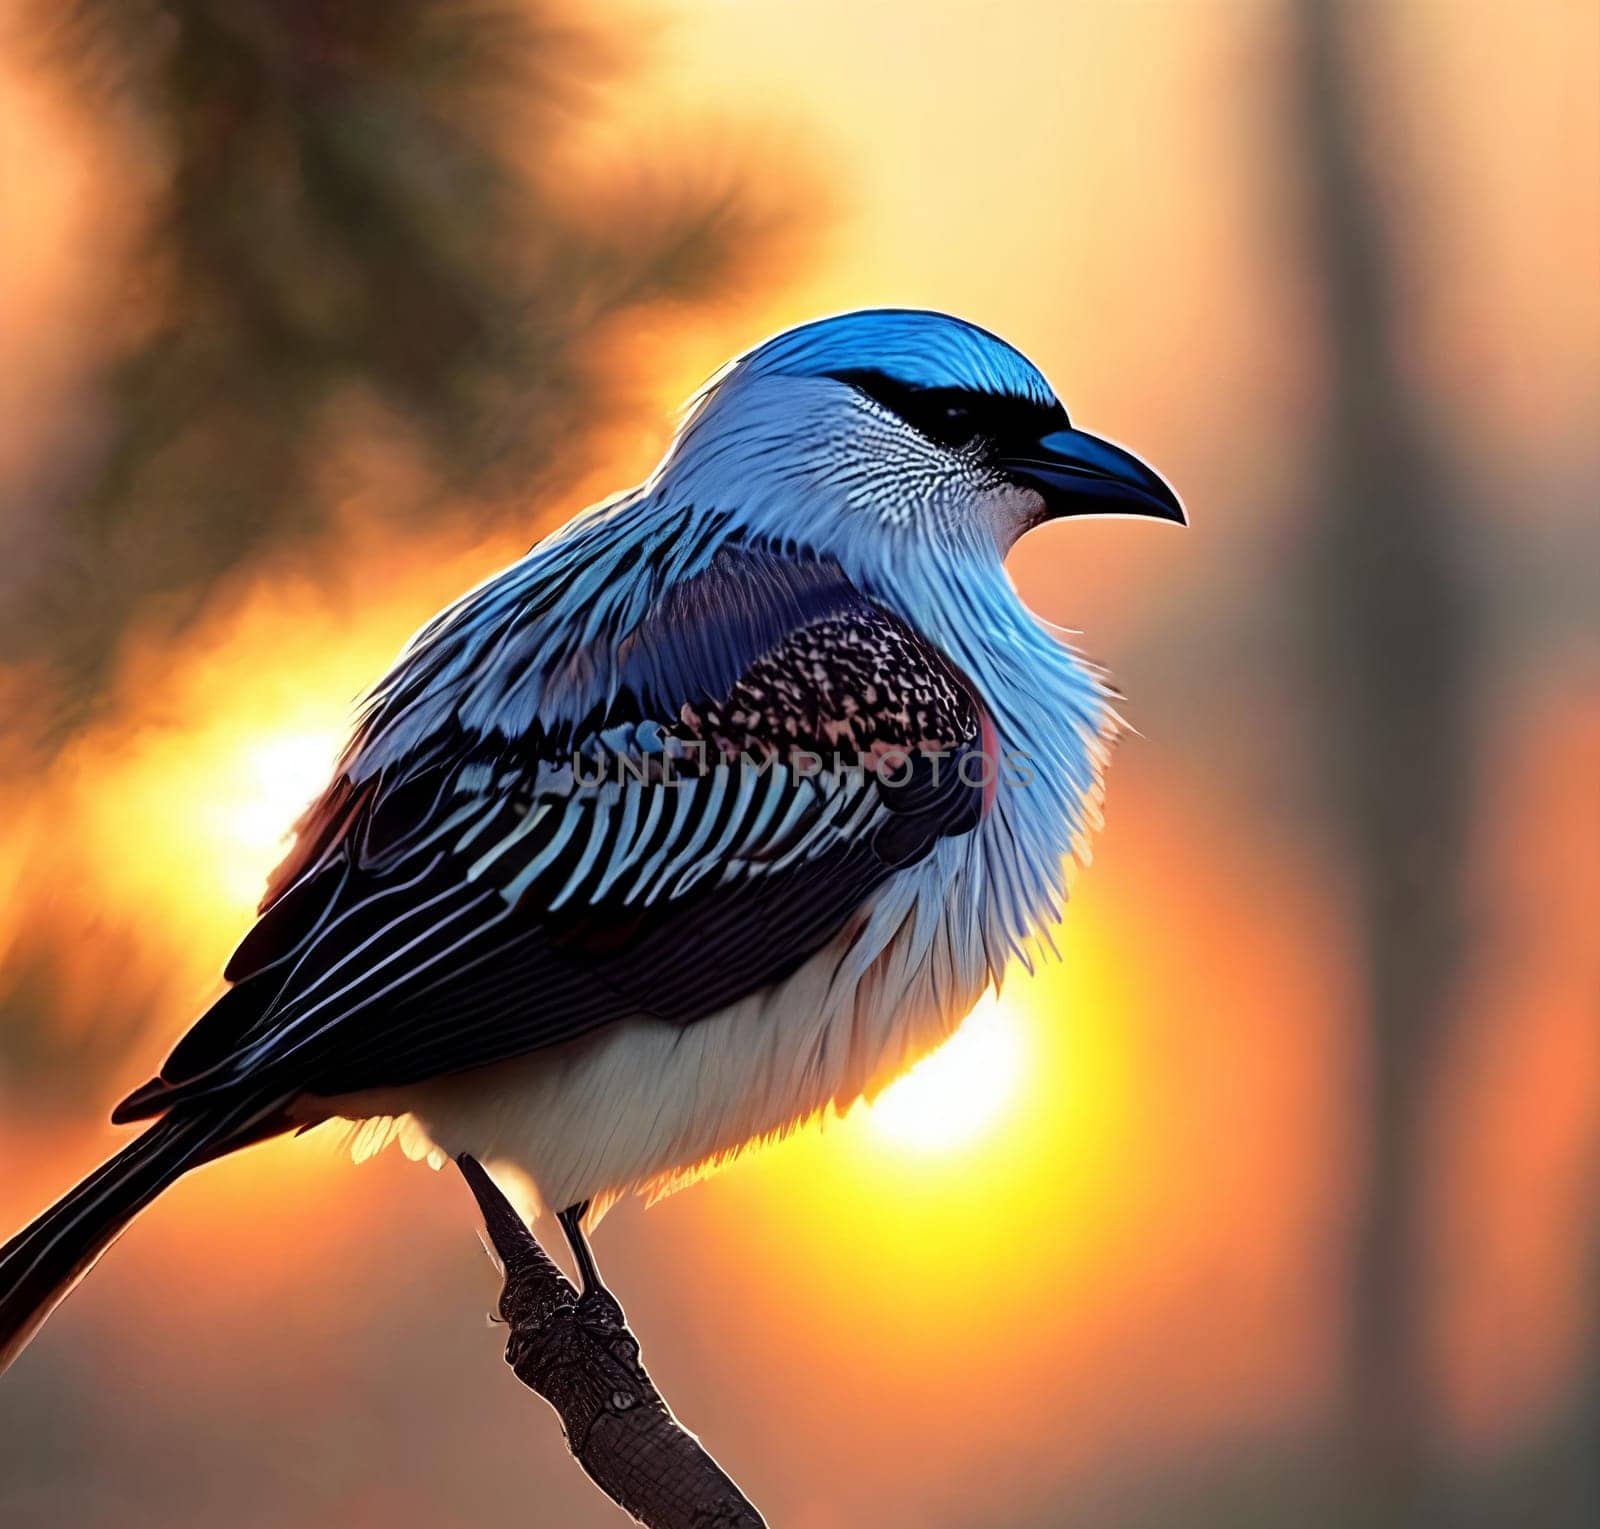 Avian Elegance. Bird perched on a branch against the setting sun, highlighting the intricate details of its feathers and the delicate play of light on its plumage in a stunning close-up shot.